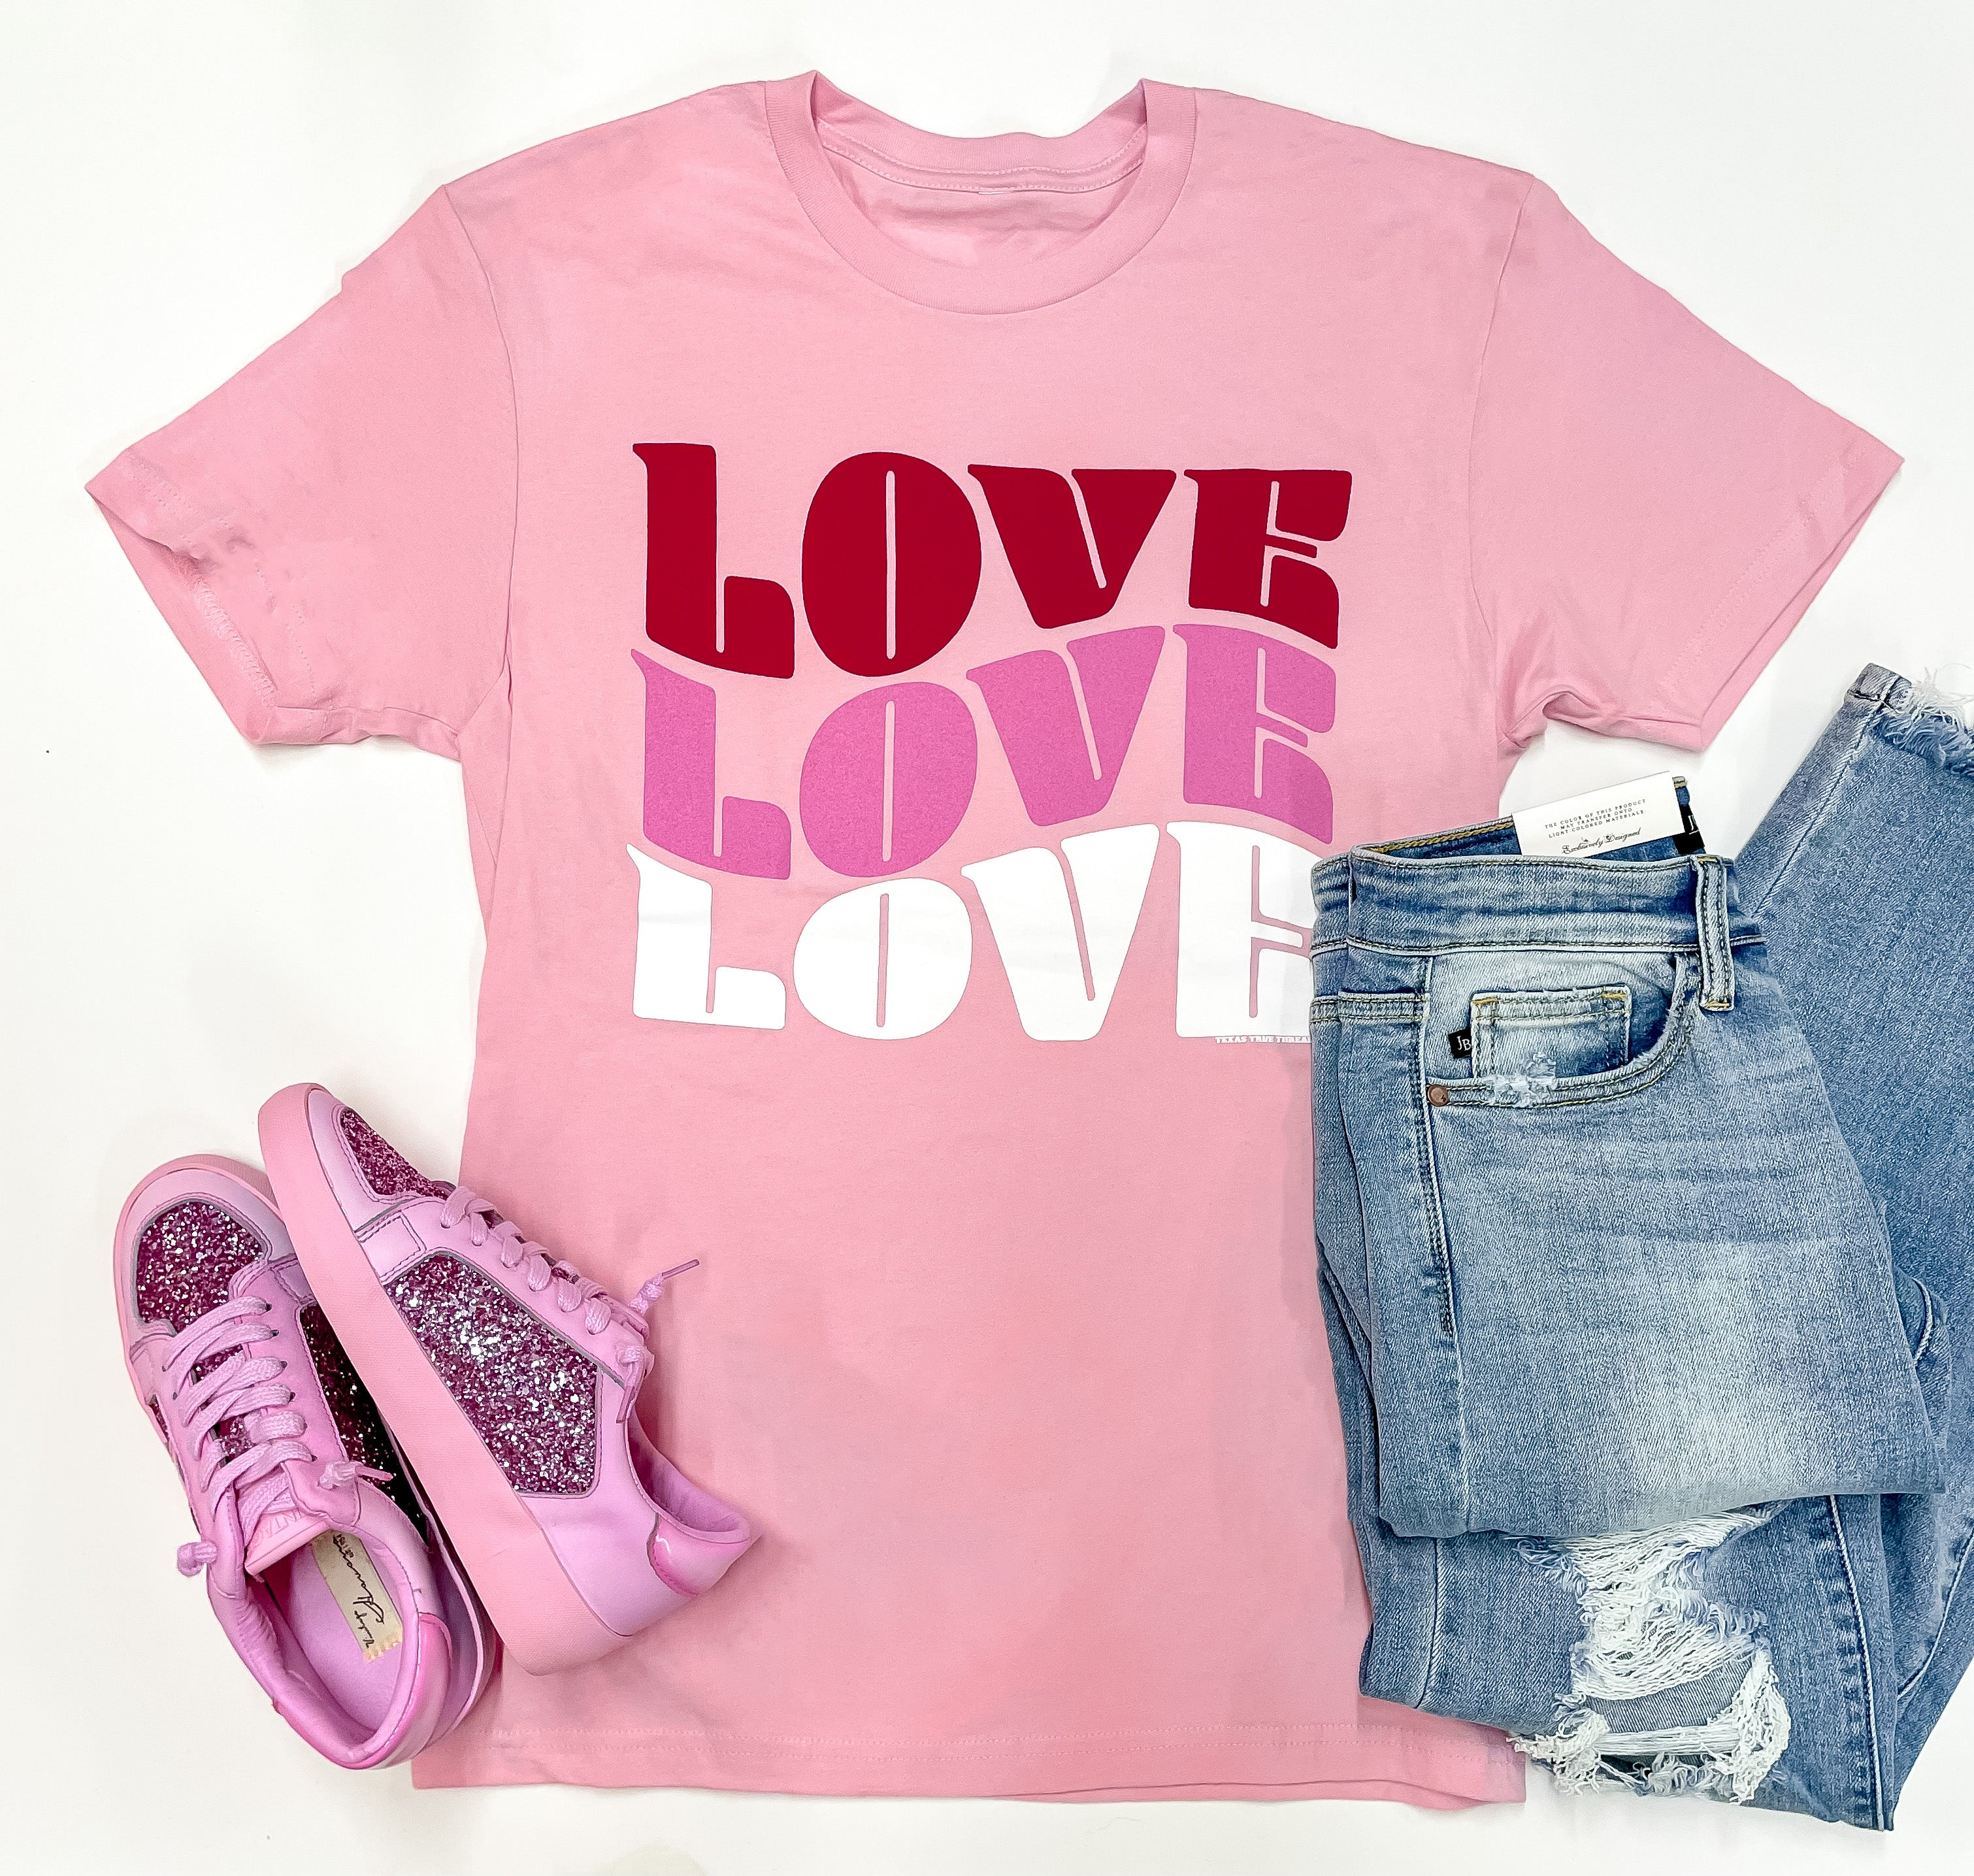 A light pink tee shirt with a graphic that says "LOVE" three times, in red, hot pink, and white. This tee shirt is pictured on a white background with distressed jeans and hot pink sneakers to match.